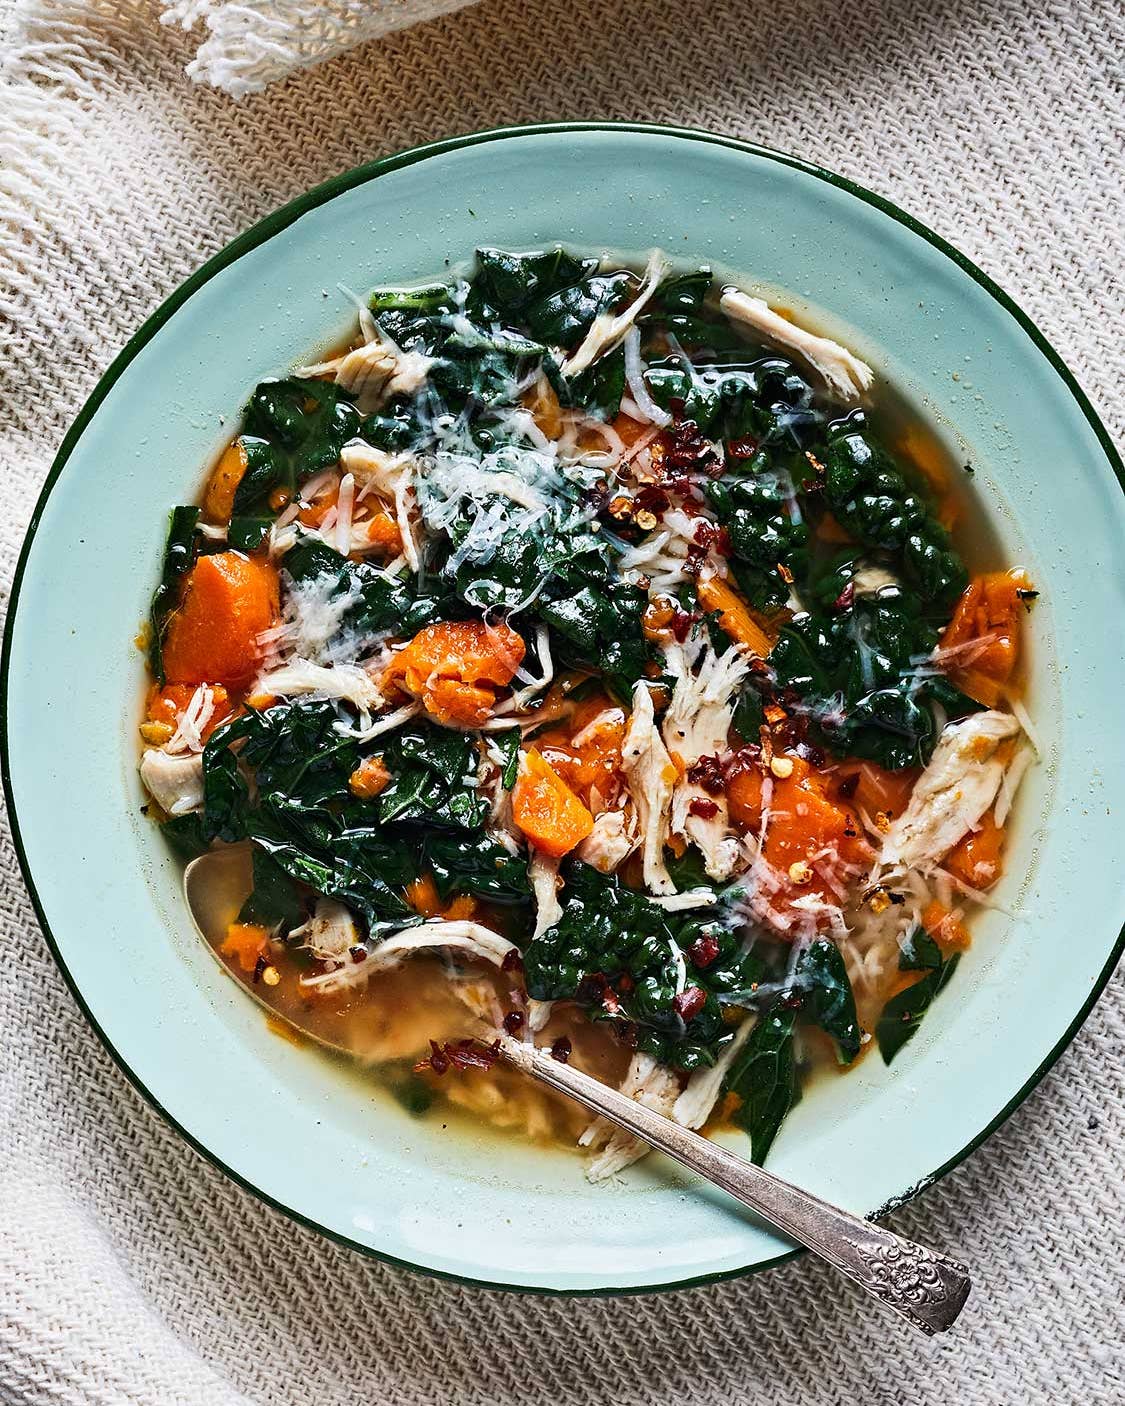 The Best Chicken Soup, with rice, carrots, and kale